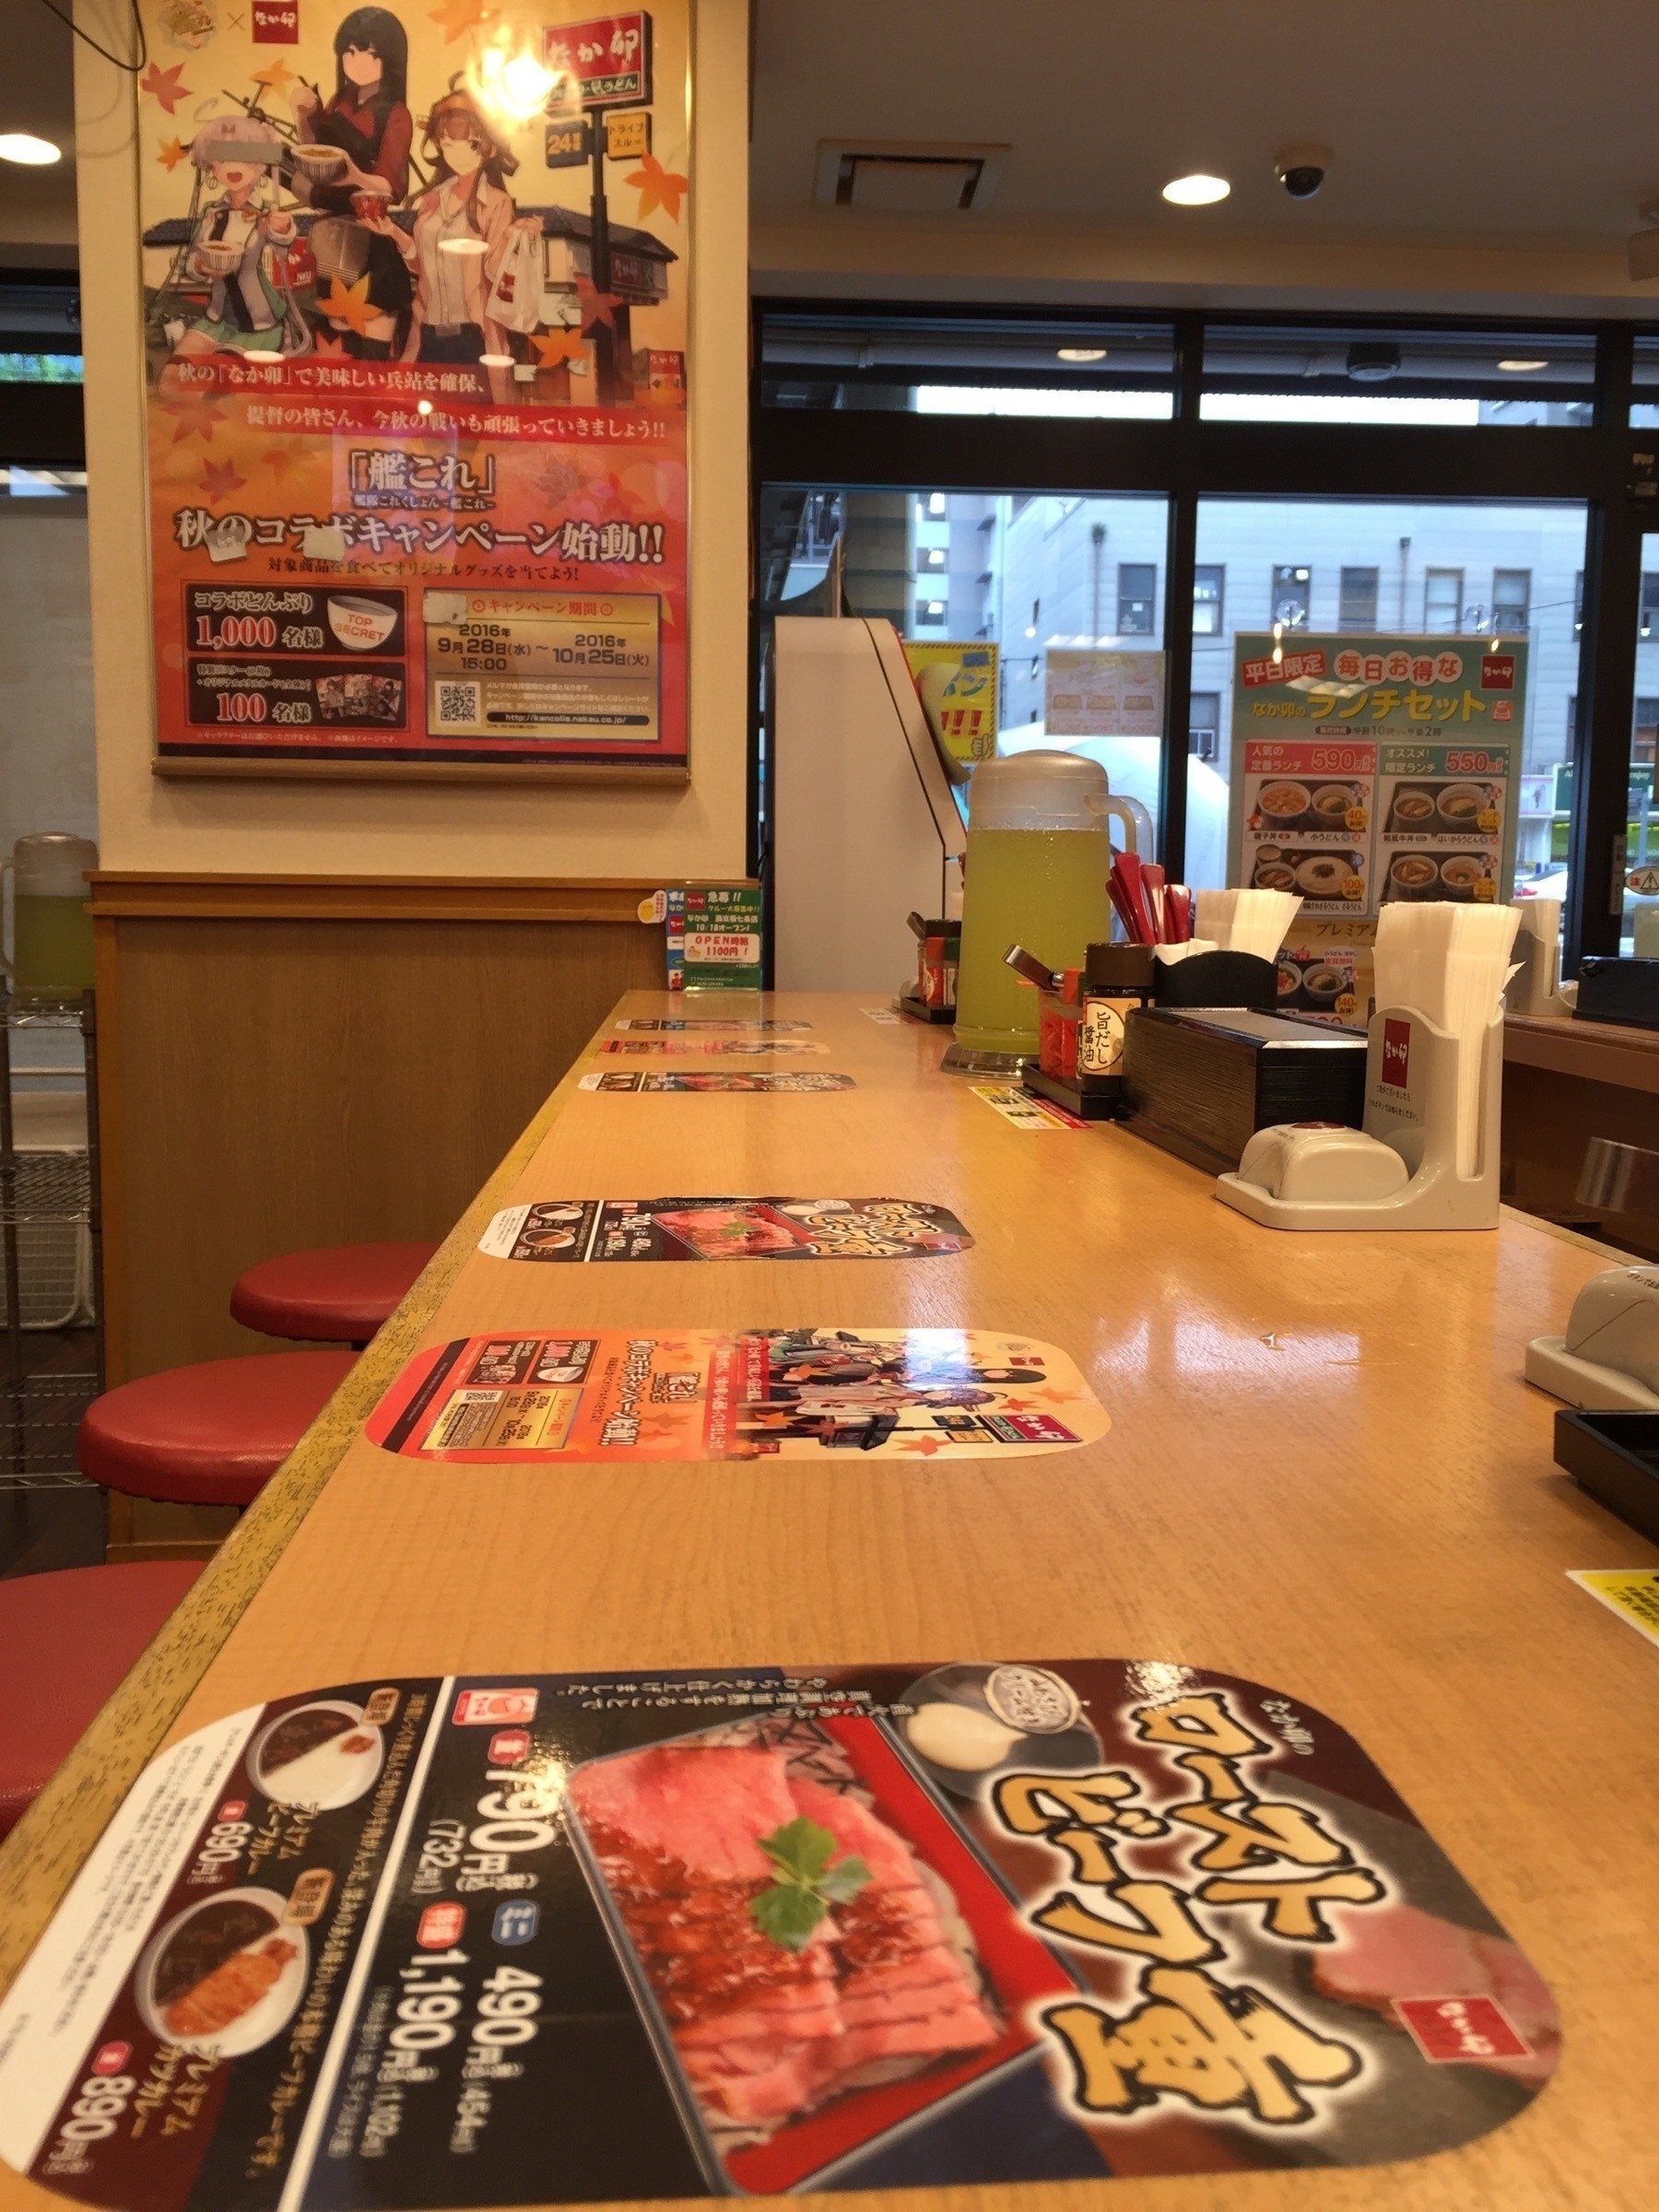 A restaurant in Kyoto, Japan where they had pictures of the food that they were serving